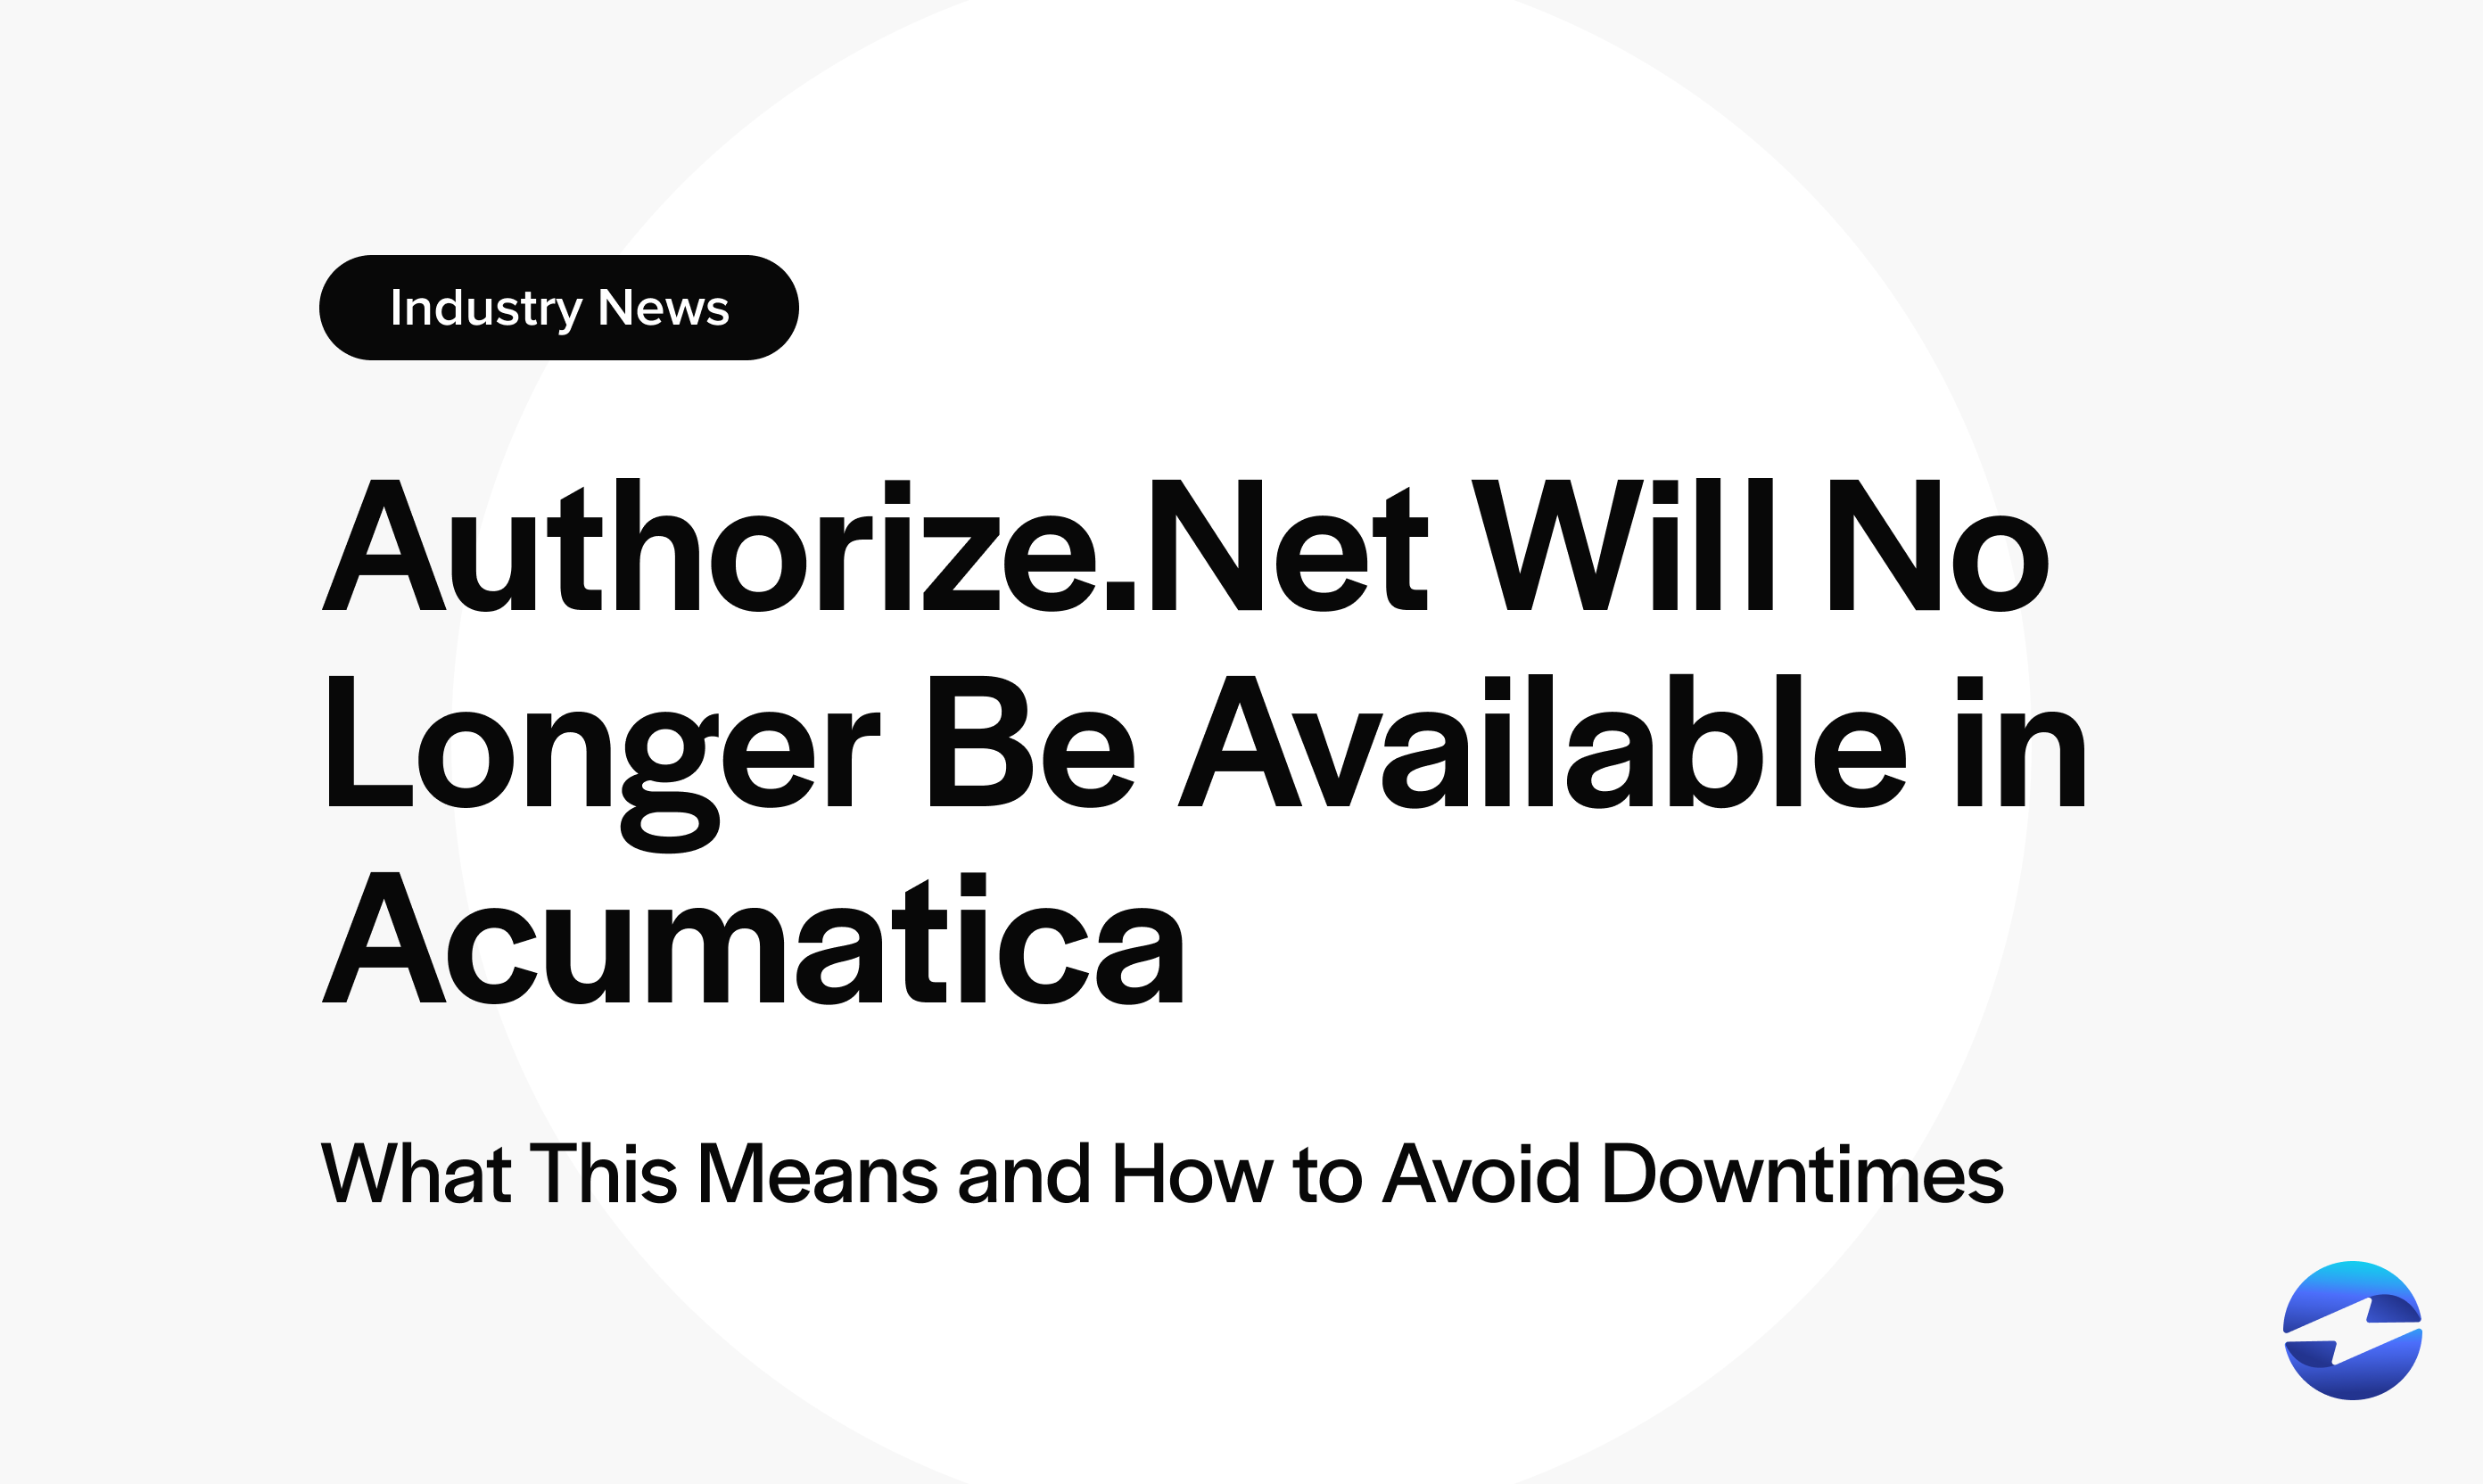 Authorize.Net Will No Longer Be Available in Acumatica